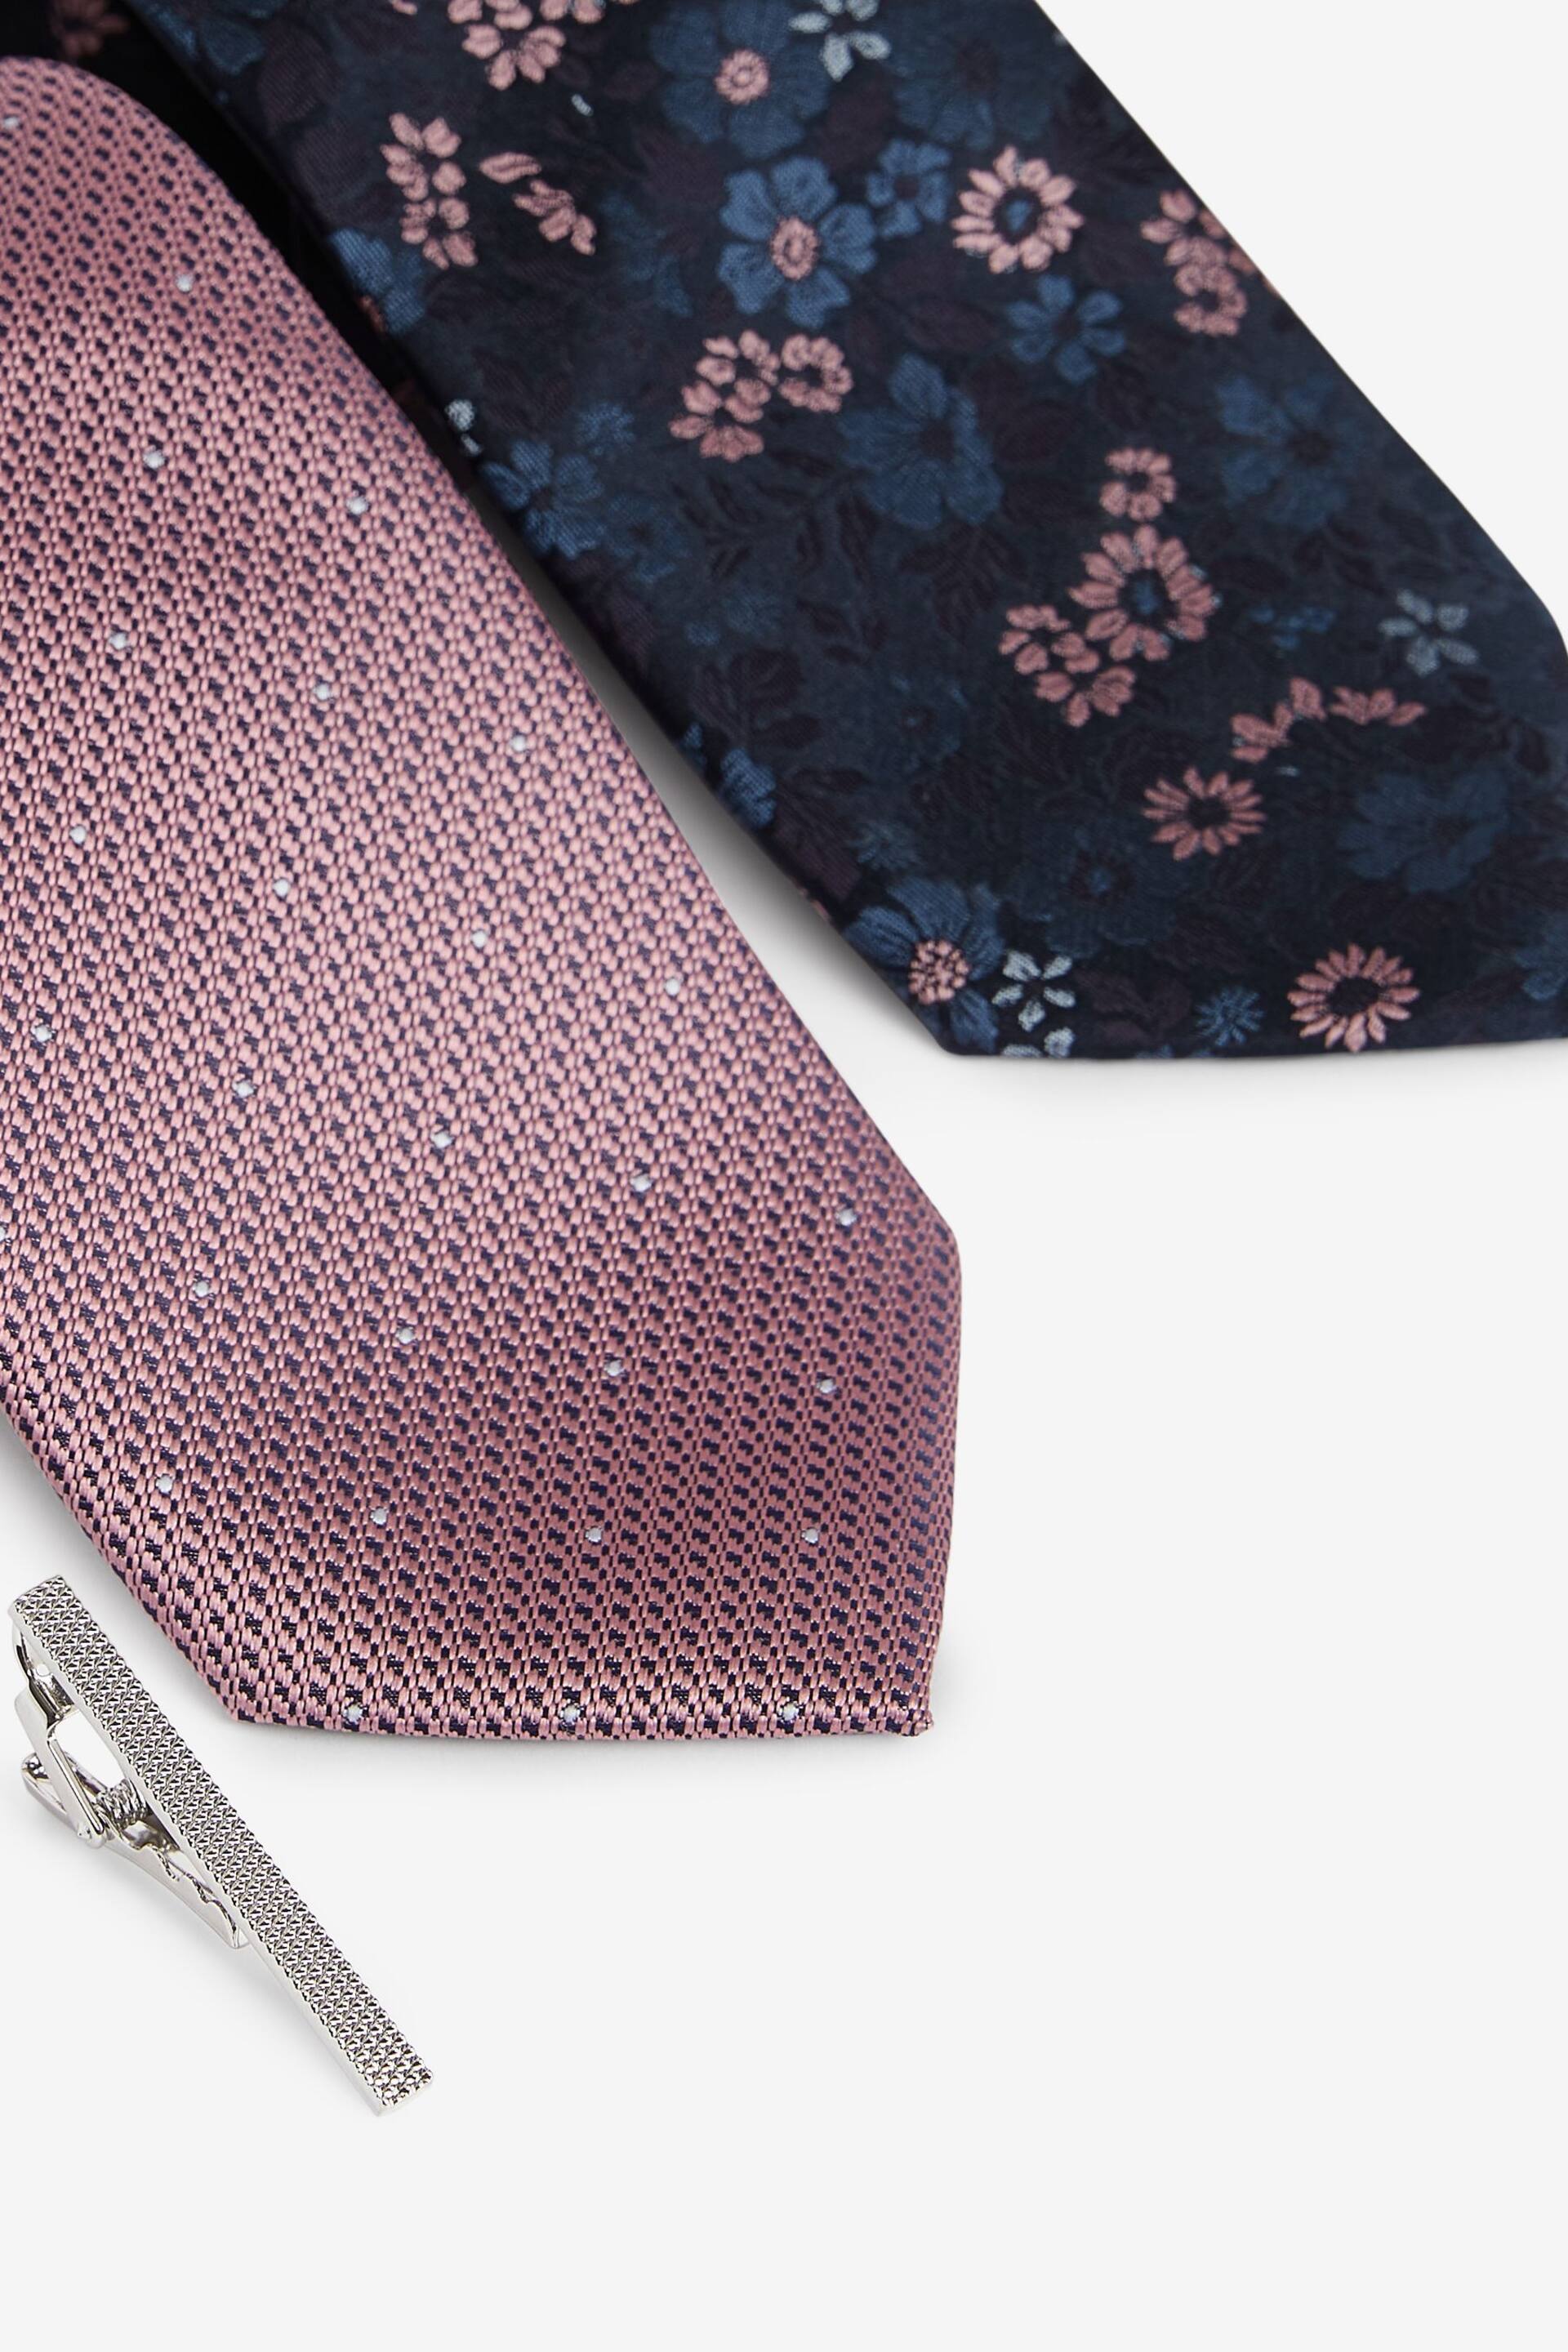 Pink Floral/Pink Polka Dot Textured Tie With Tie Clips 2 Pack - Image 2 of 3